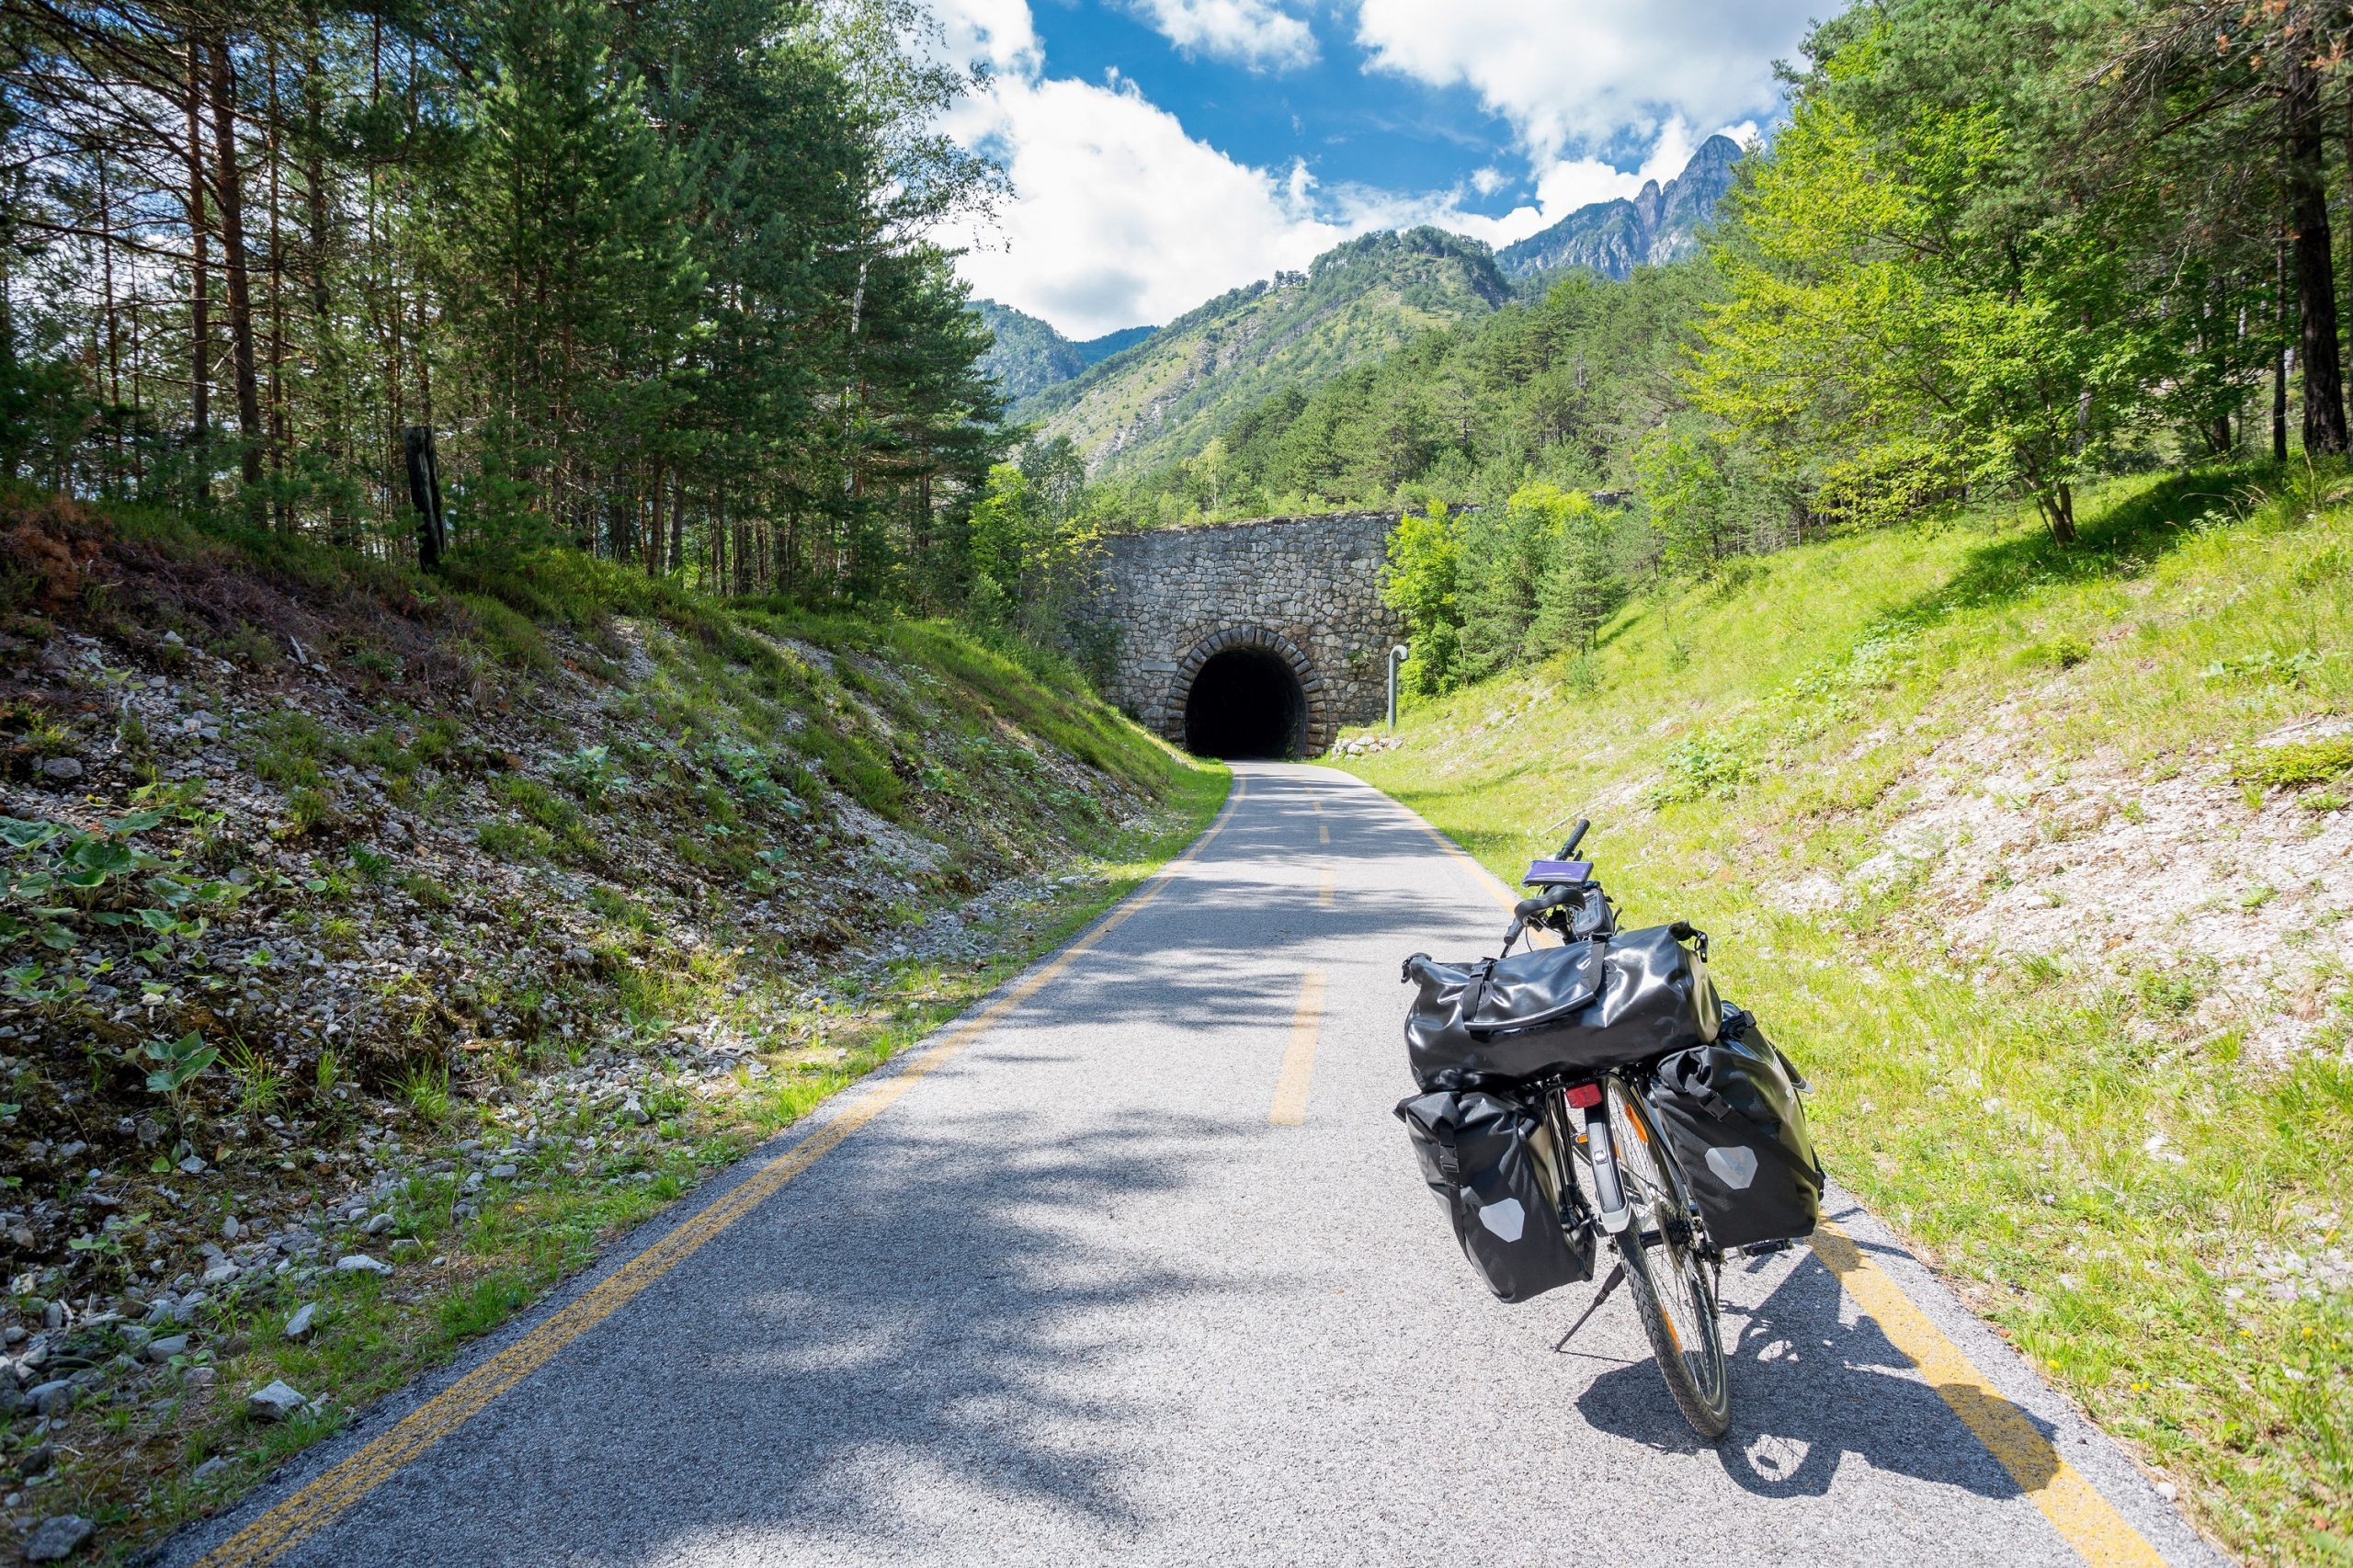 On the Alpe Adria cycle path you cycle in two diverse countries and enjoy a varied landscape full of contrasts